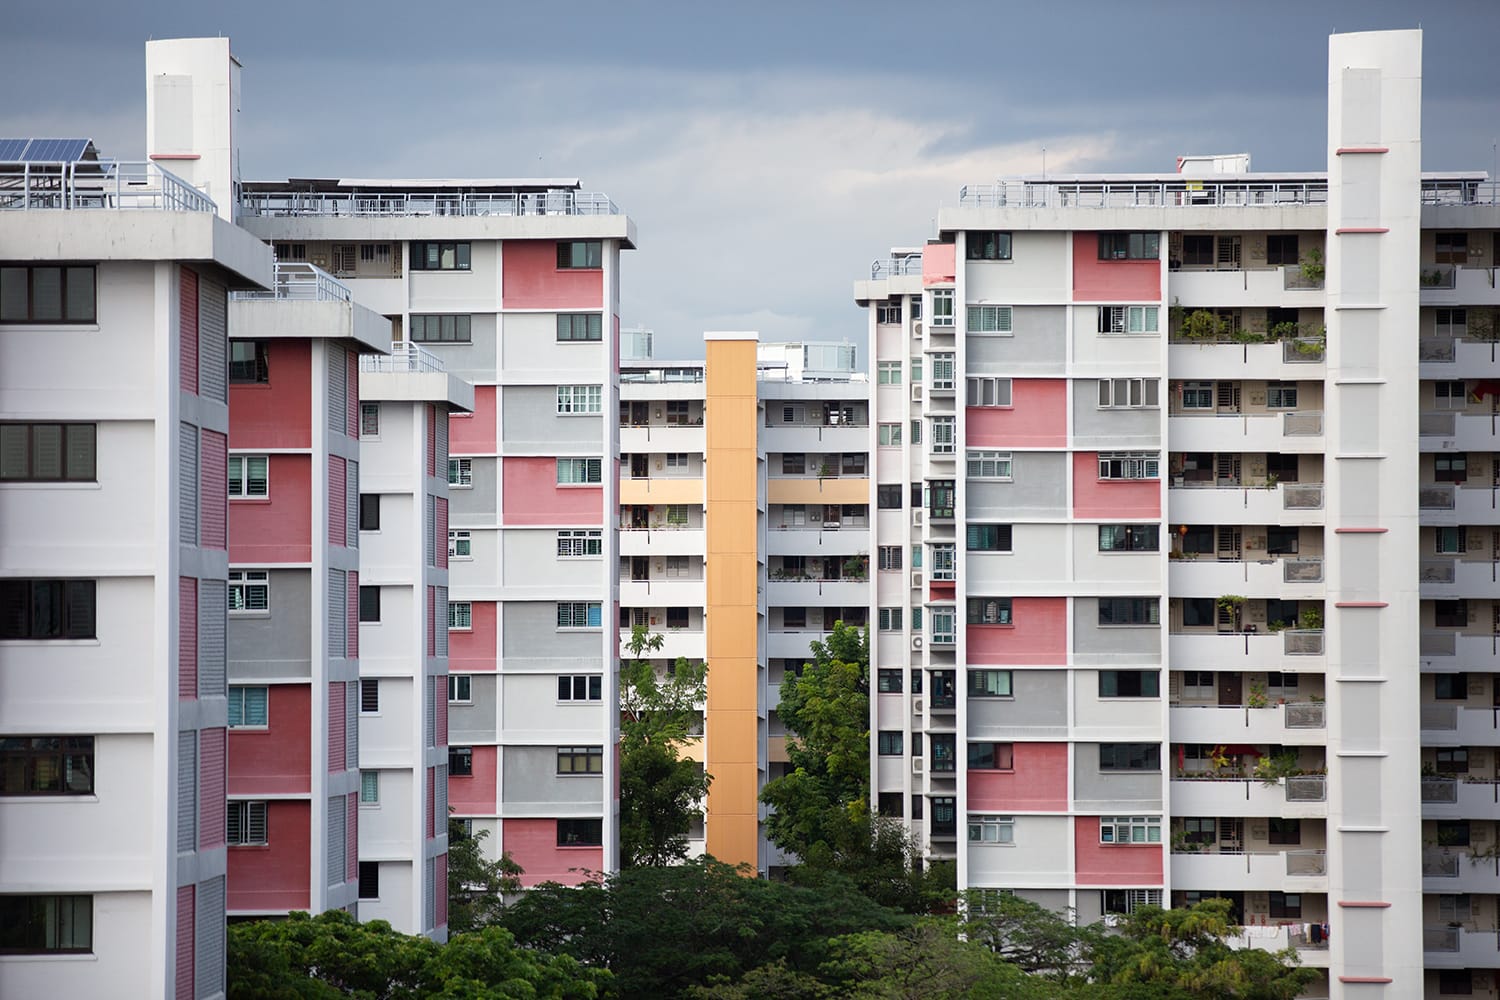 The rebates will provide "continuing help" to defray the GST and other living expenses of lower- to middle-income Singaporean households, said the Ministry of Finance (MOF) on Friday (July 1).